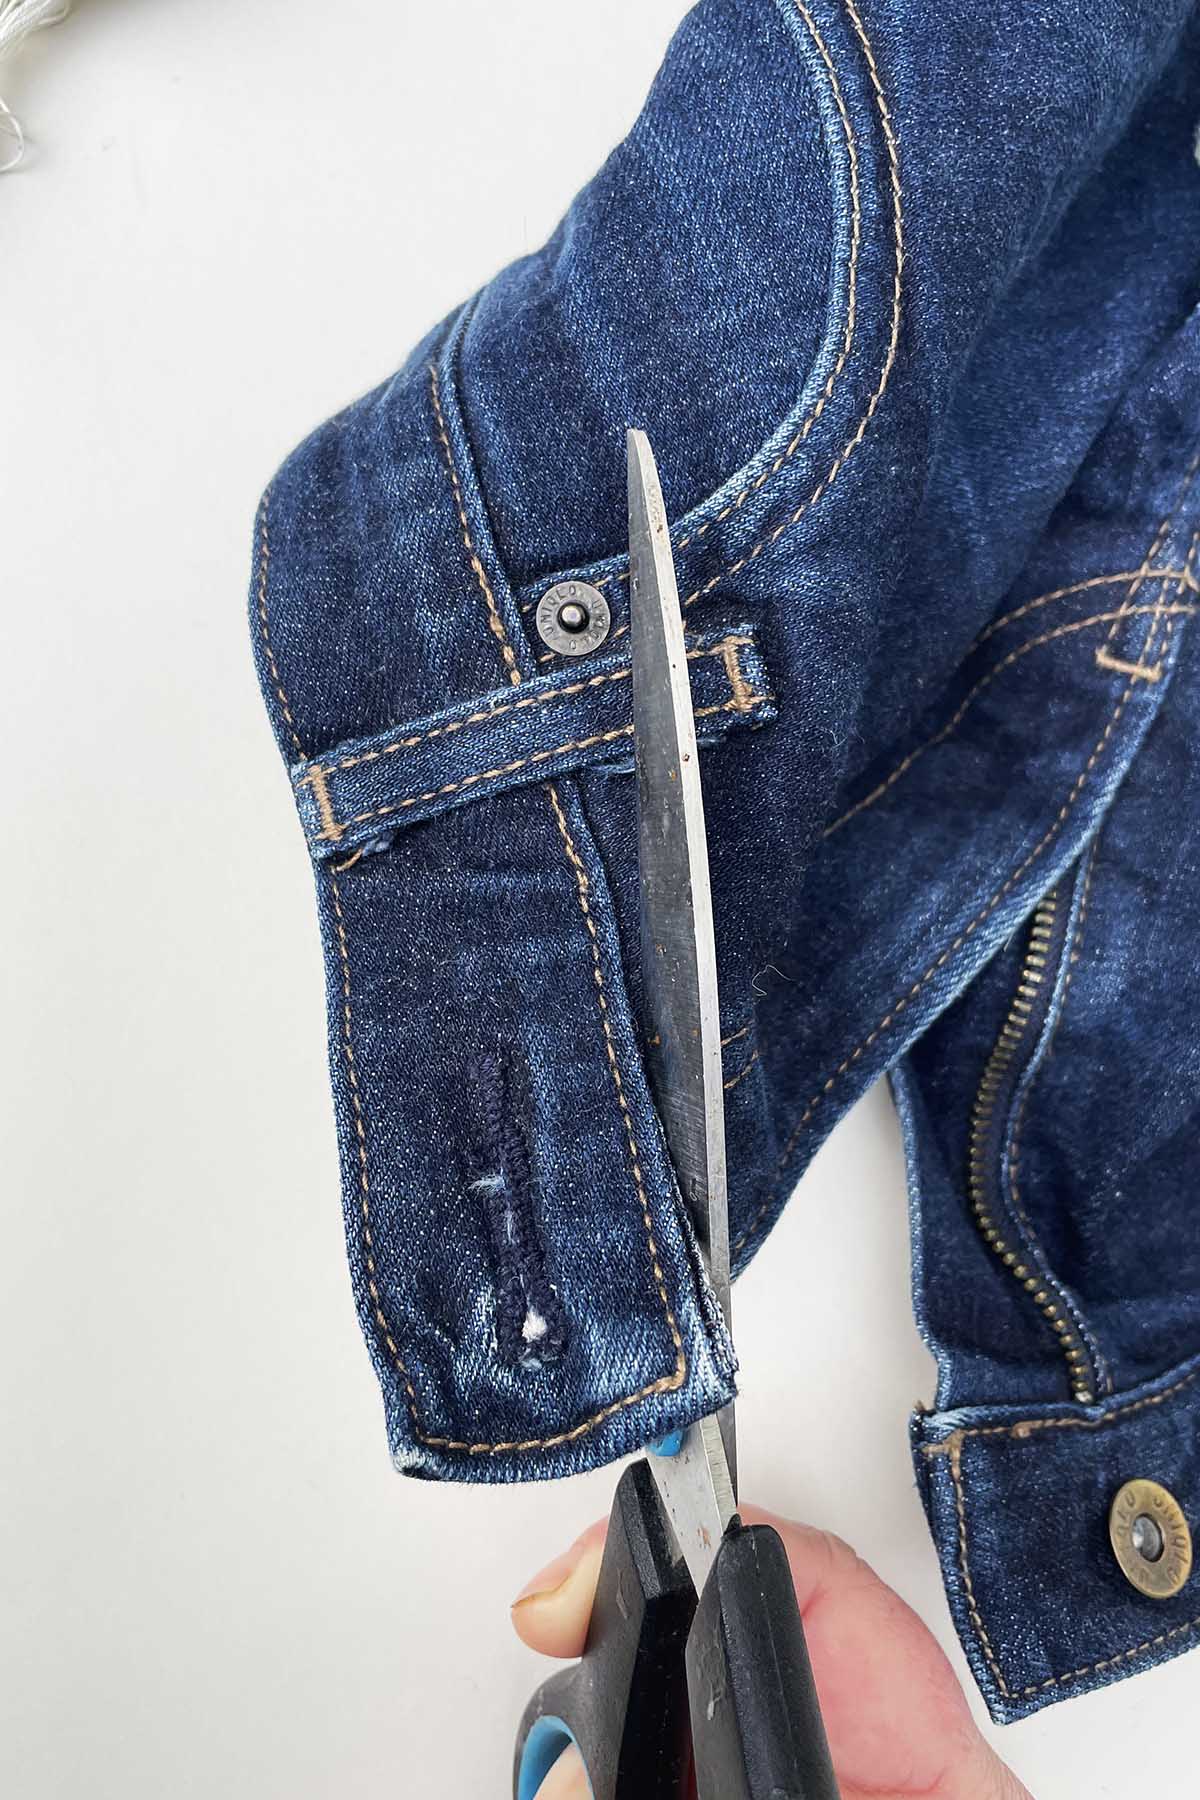 cutting the denim waistband off a pair of jeans with scissors